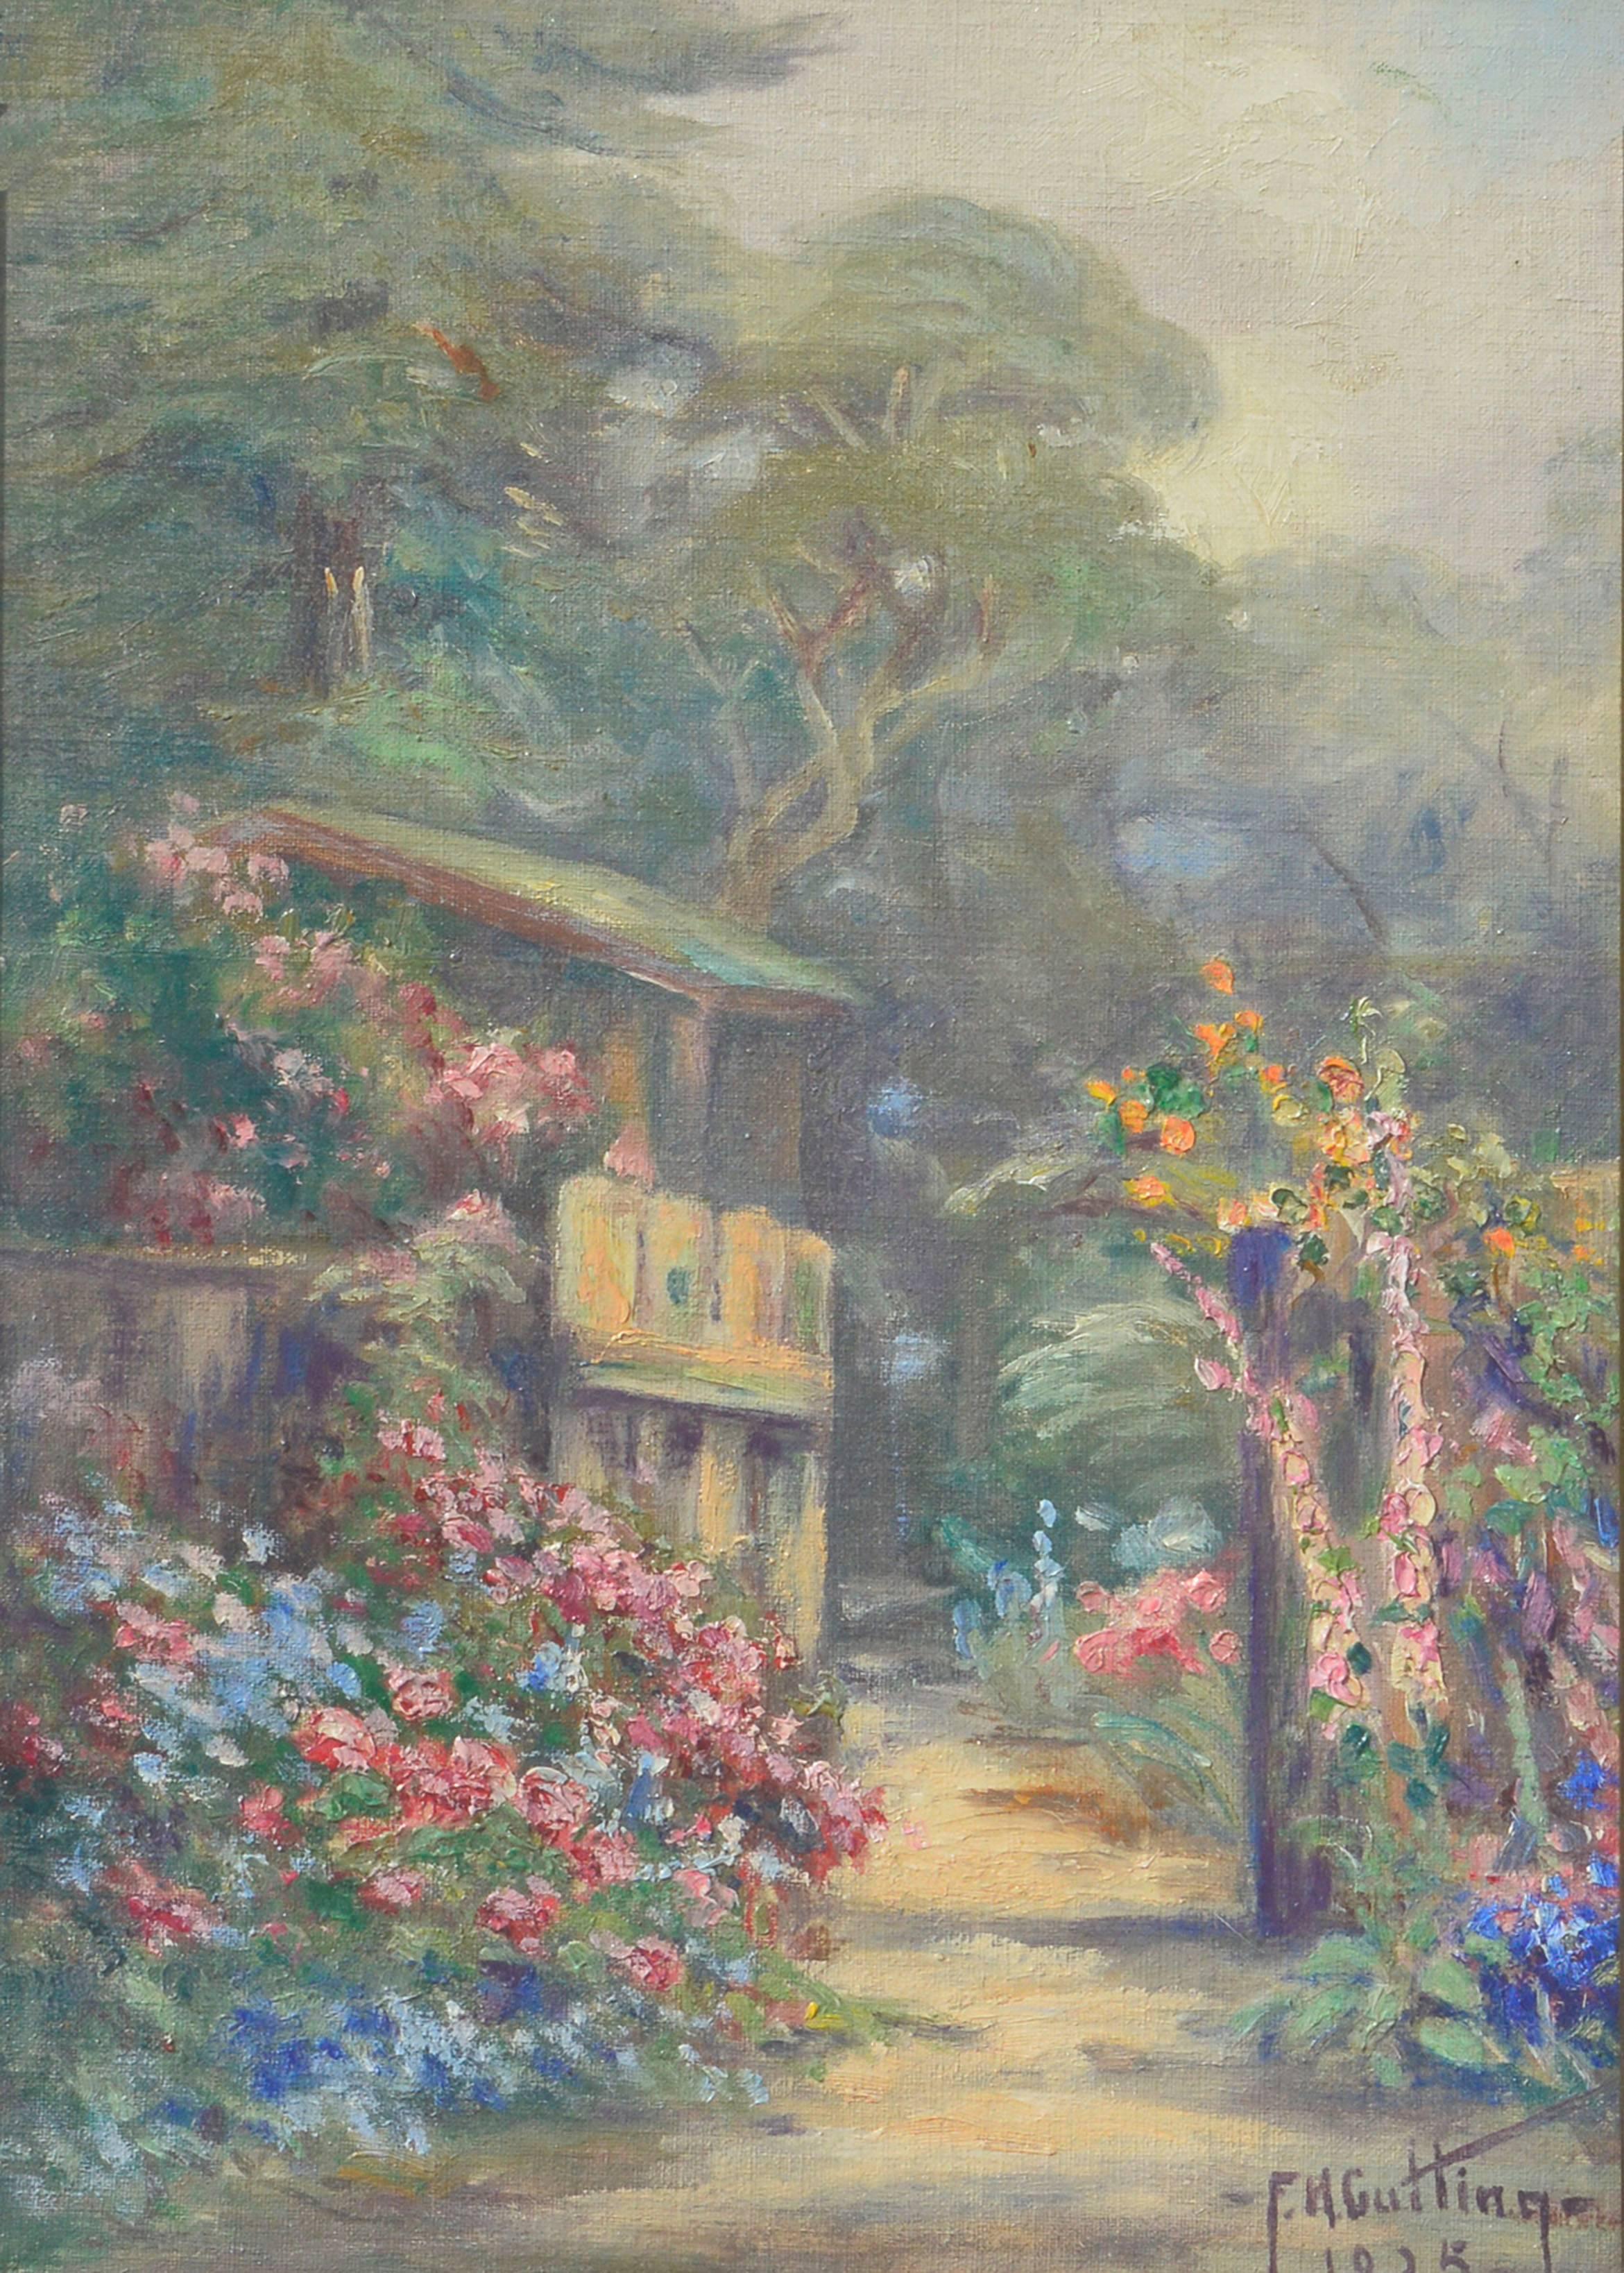 Pacific Grove Garden Gate, 1925 - Floral Landscape  - Painting by Frank Cutting